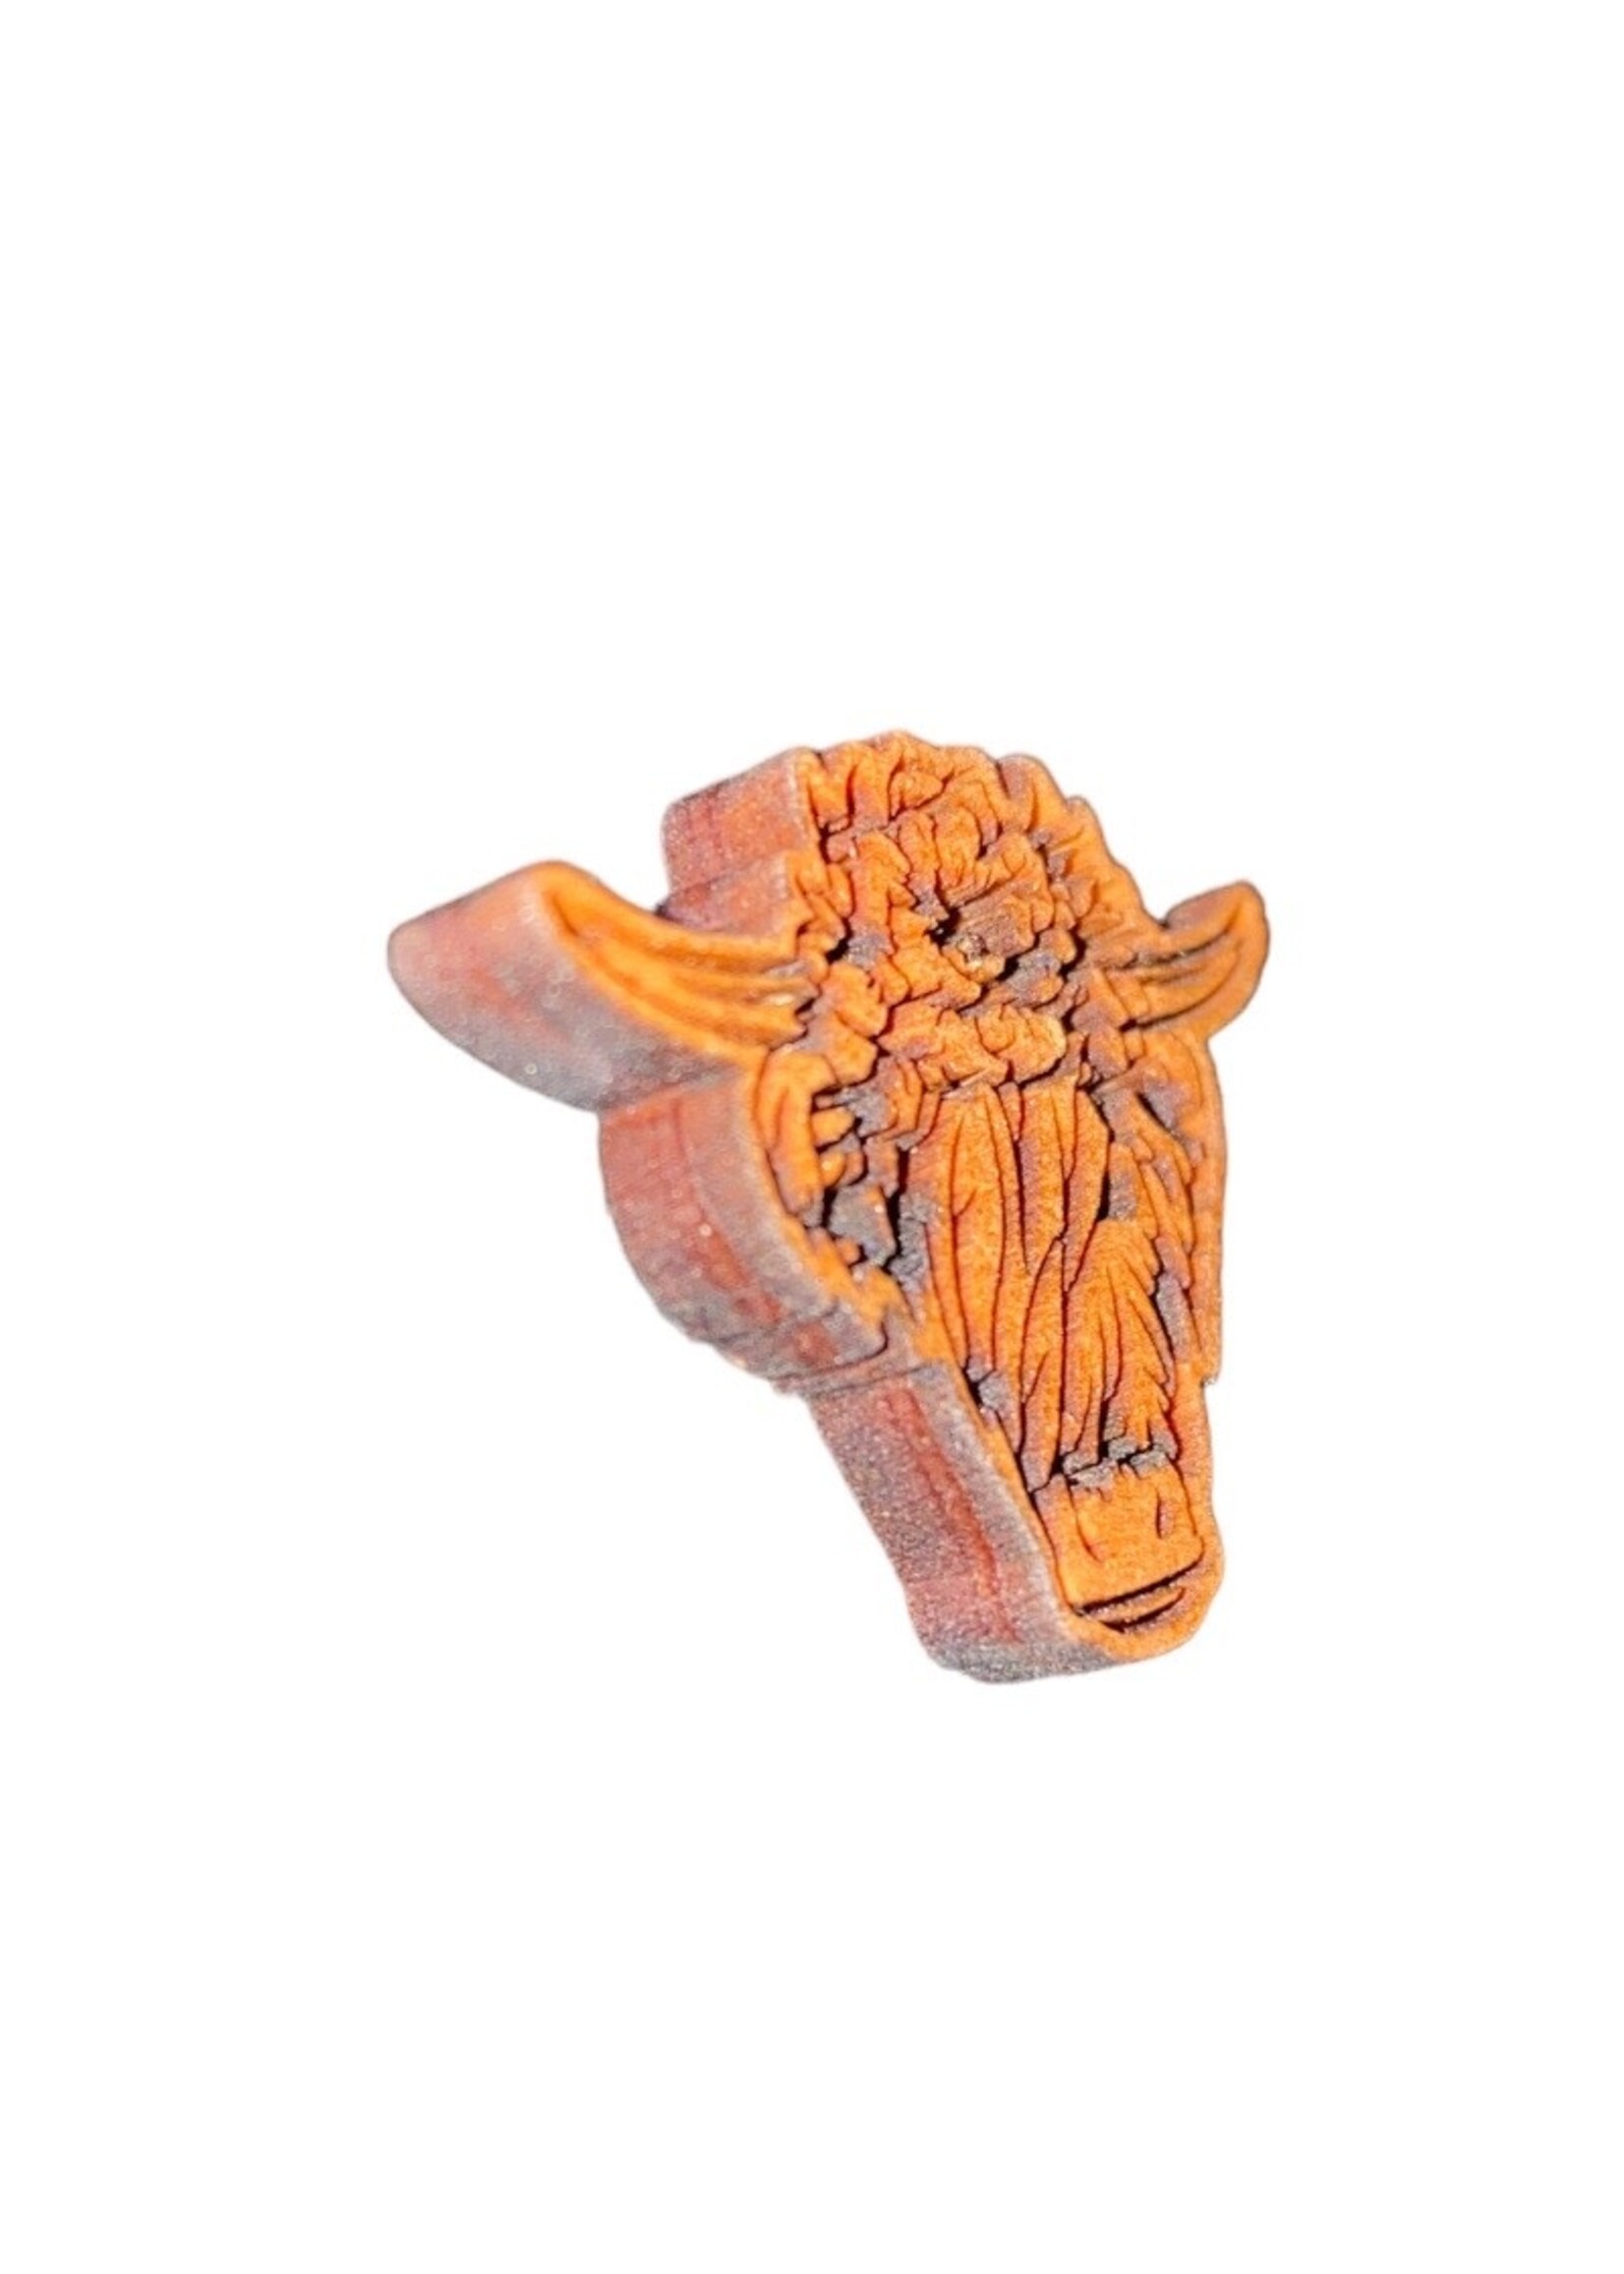 Grandfather Tree Collectible Pin (Redwood) Highland Cow